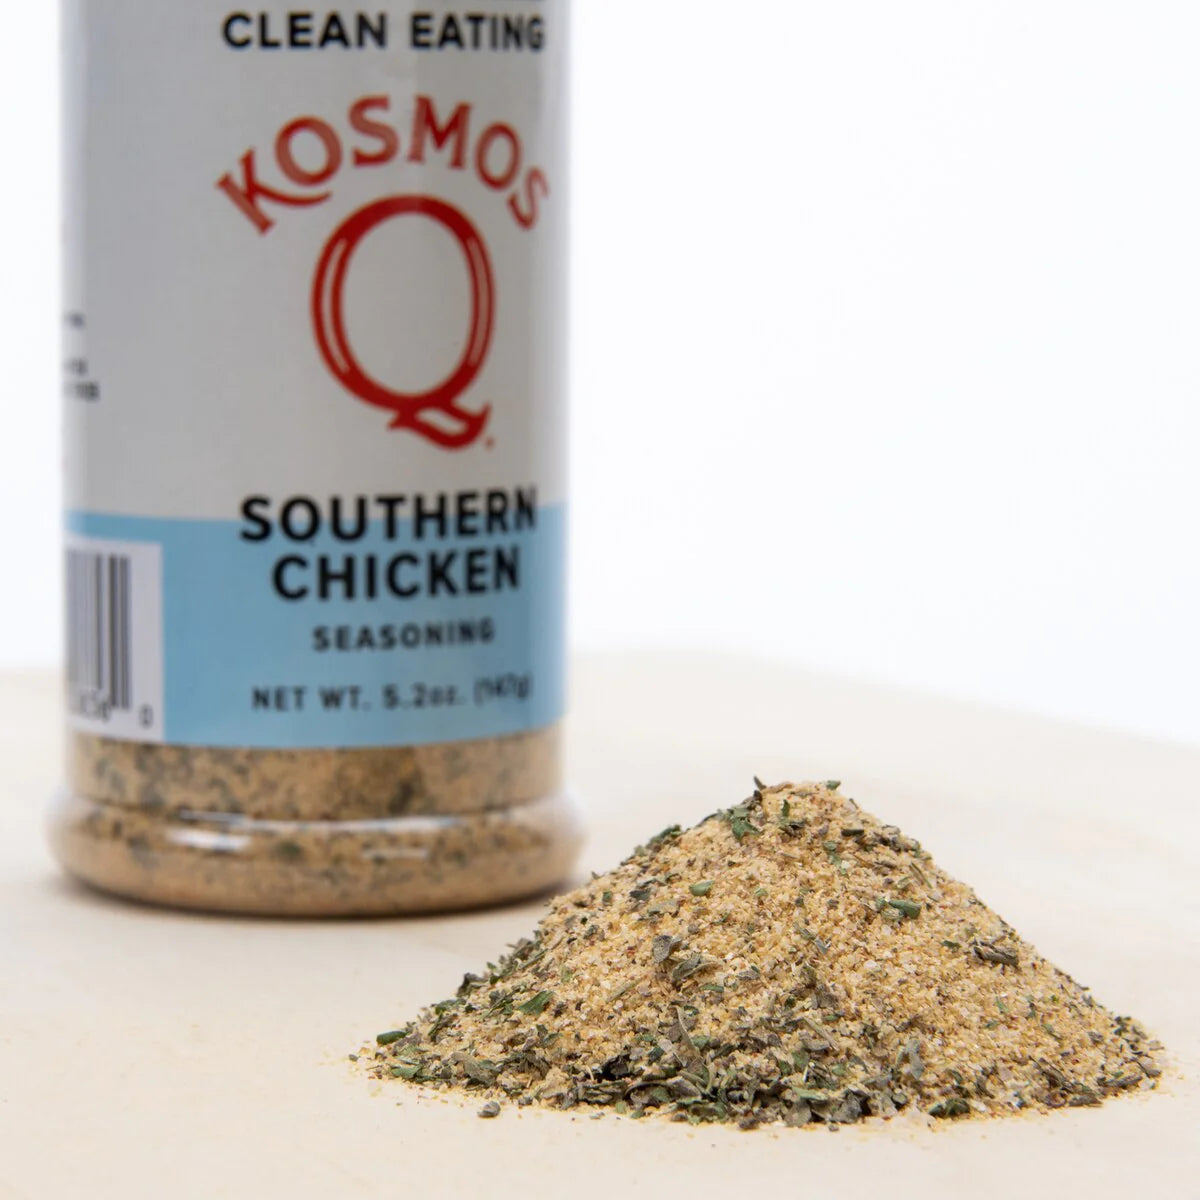 Dried thyme, basil and parsley are prominent in this Southern Chicken seasoning.